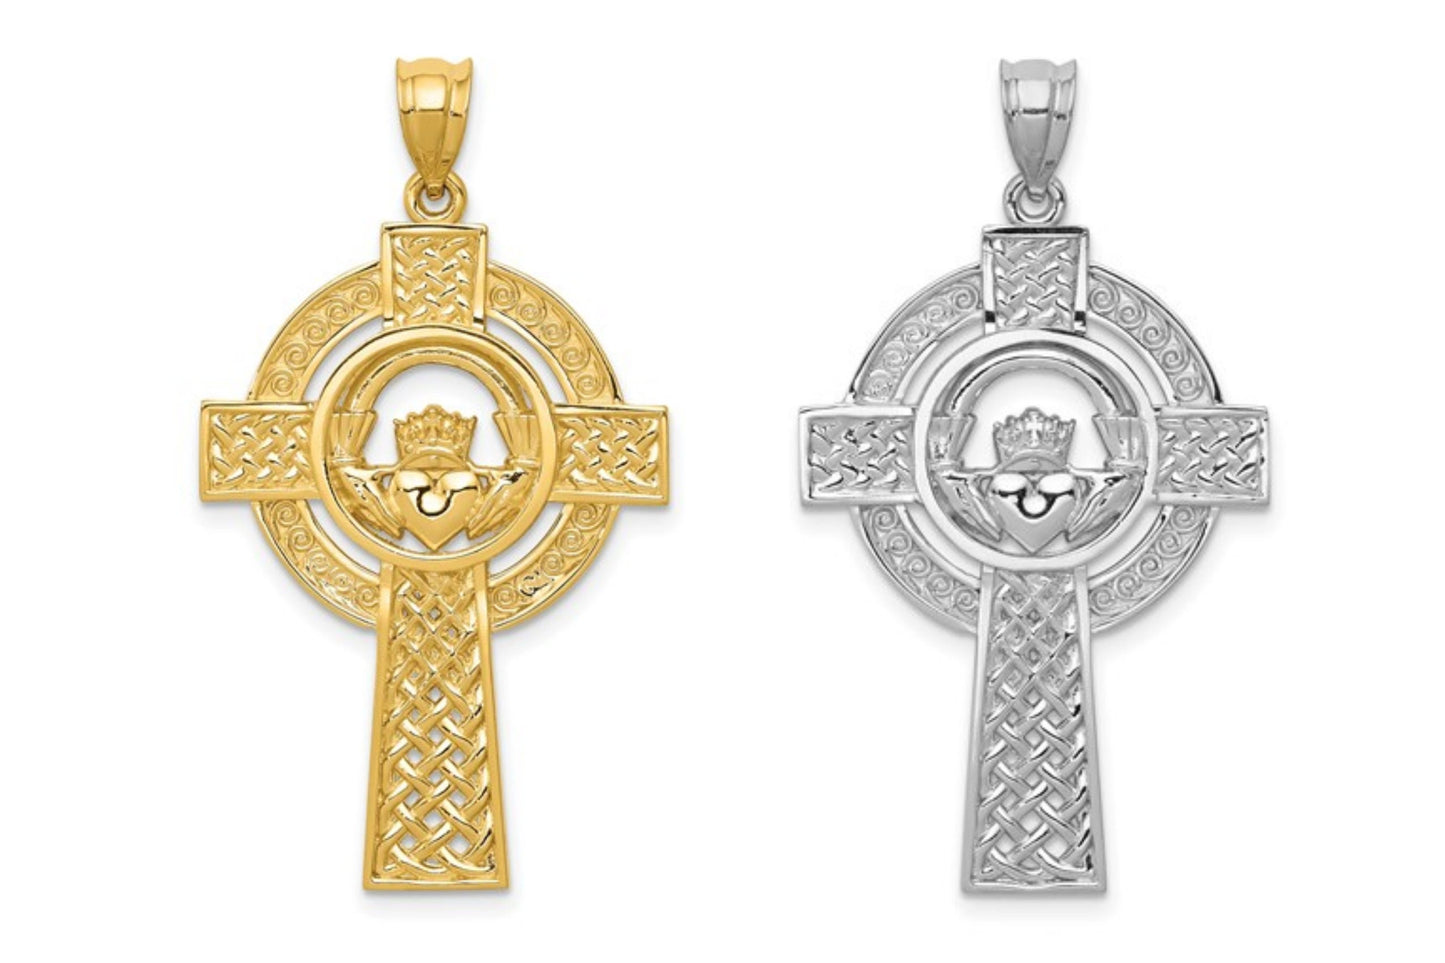 14k Solid Yellow or White Gold Celtic Iona Claddagh Cross Charm Pendant 1.5" Long x .8" Width. Classic Religious Irish Jewelry